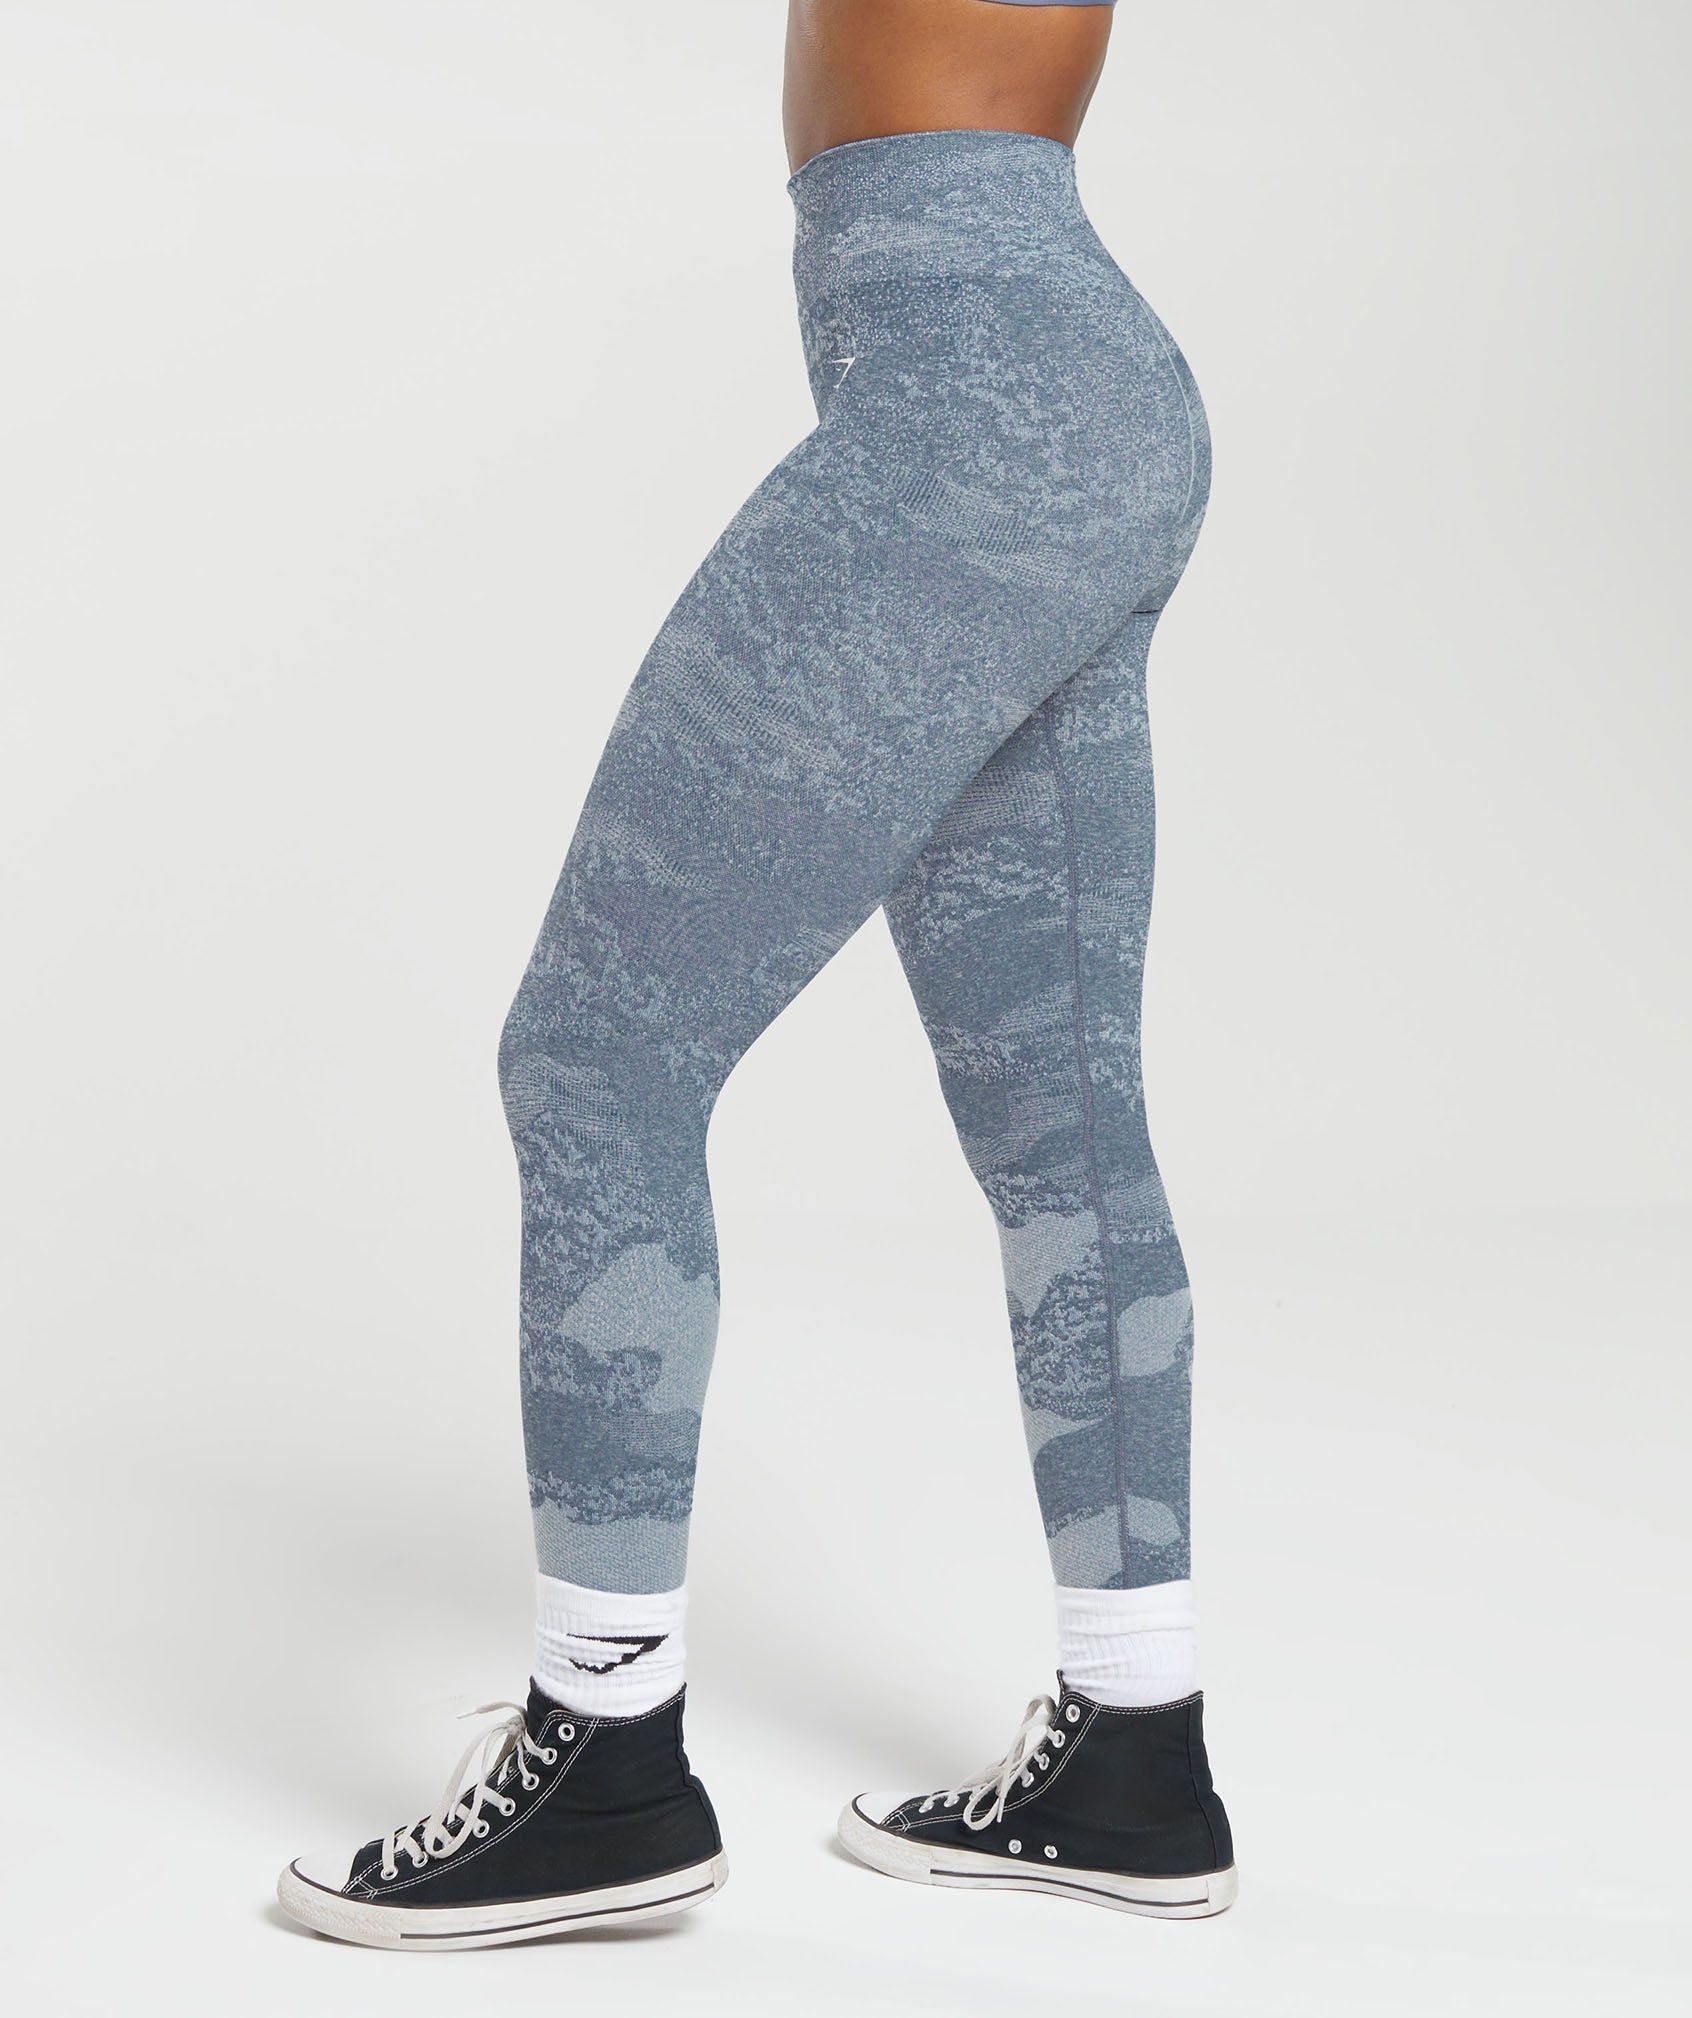 Adapt Camo Seamless Leggings in  River Stone Grey/Evening Blue - view 3